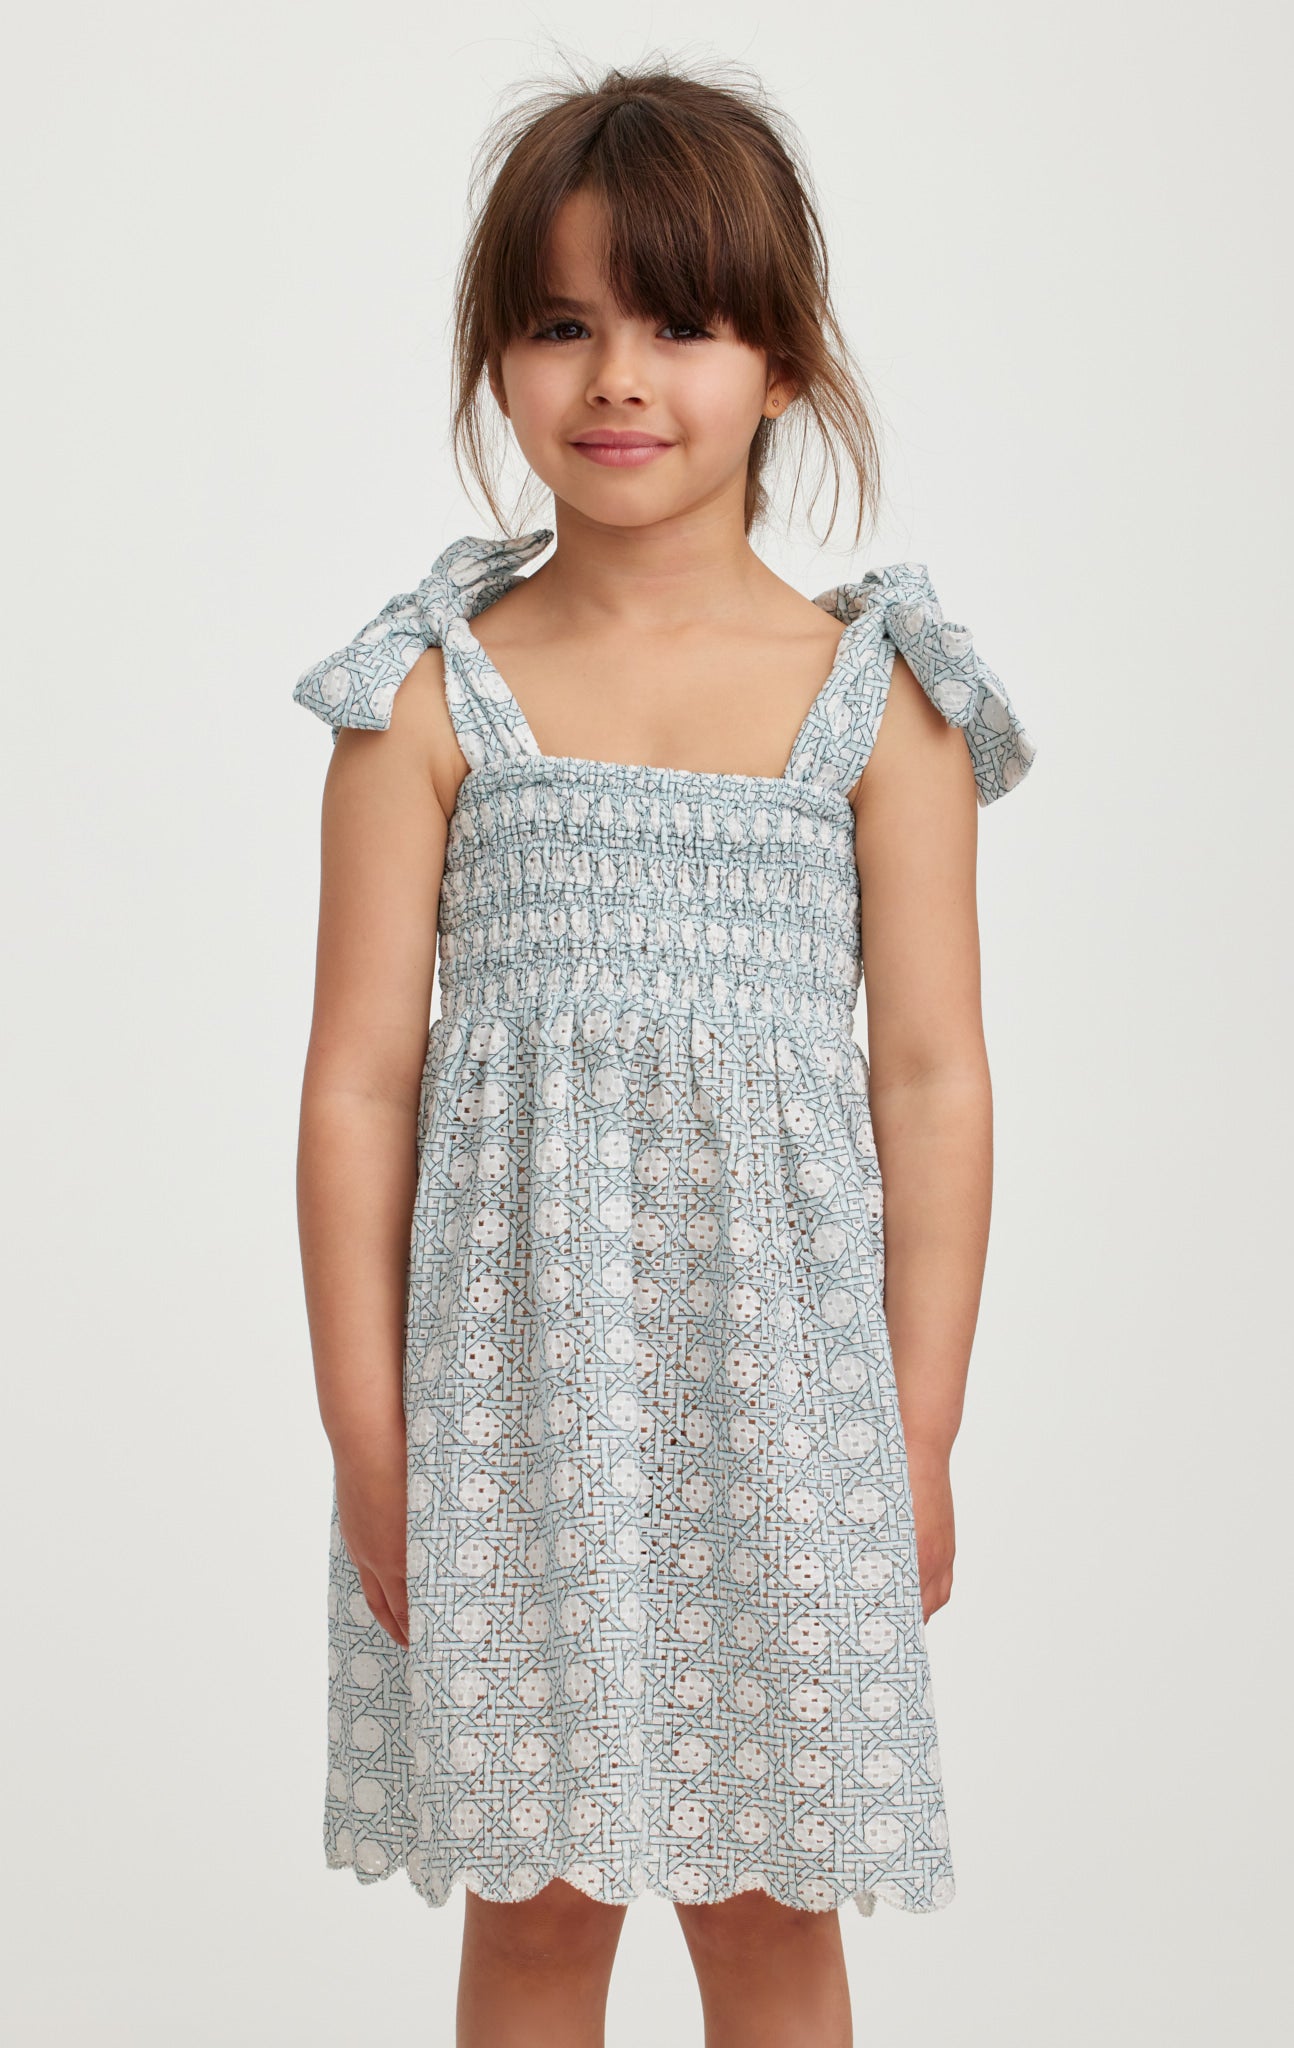 Bumby Smocked Babydoll Dress in Morning Cane Print MARYSIA